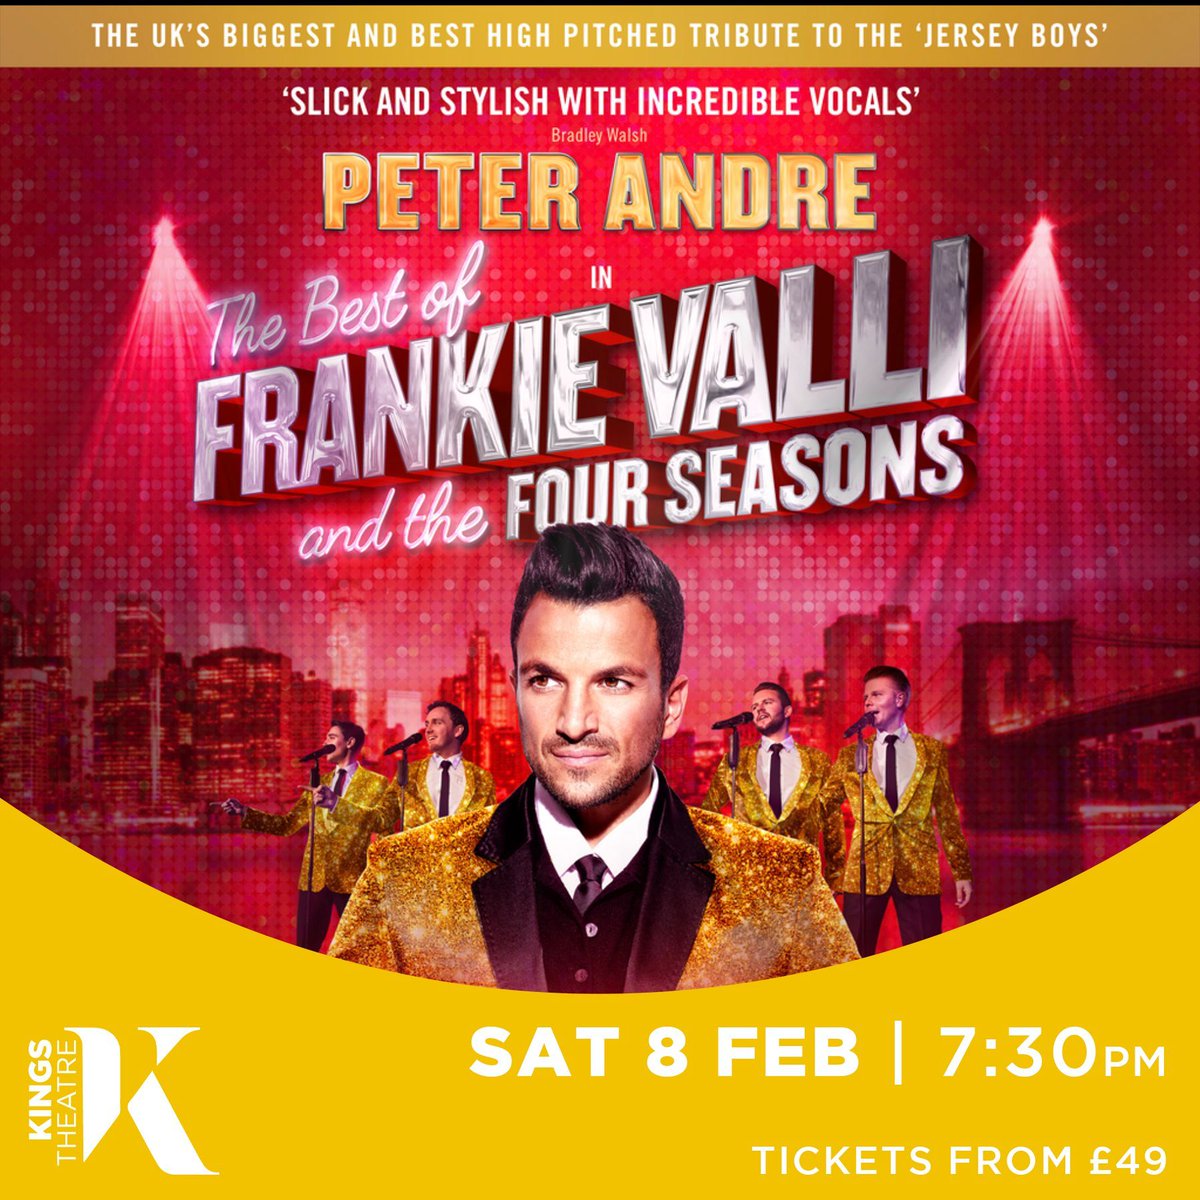 ✨NEW SHOW ON SALE!✨ Peter Andre in The Best of Frankie Valli and the Four Seasons! Join us for a spectacular high-pitched celebration of timeless music from one of the biggest selling groups of all time! 📅 Sat 8 Feb | 7:30pm 🎟️ Tickets from £49 ➡️ buff.ly/4bfXY6S